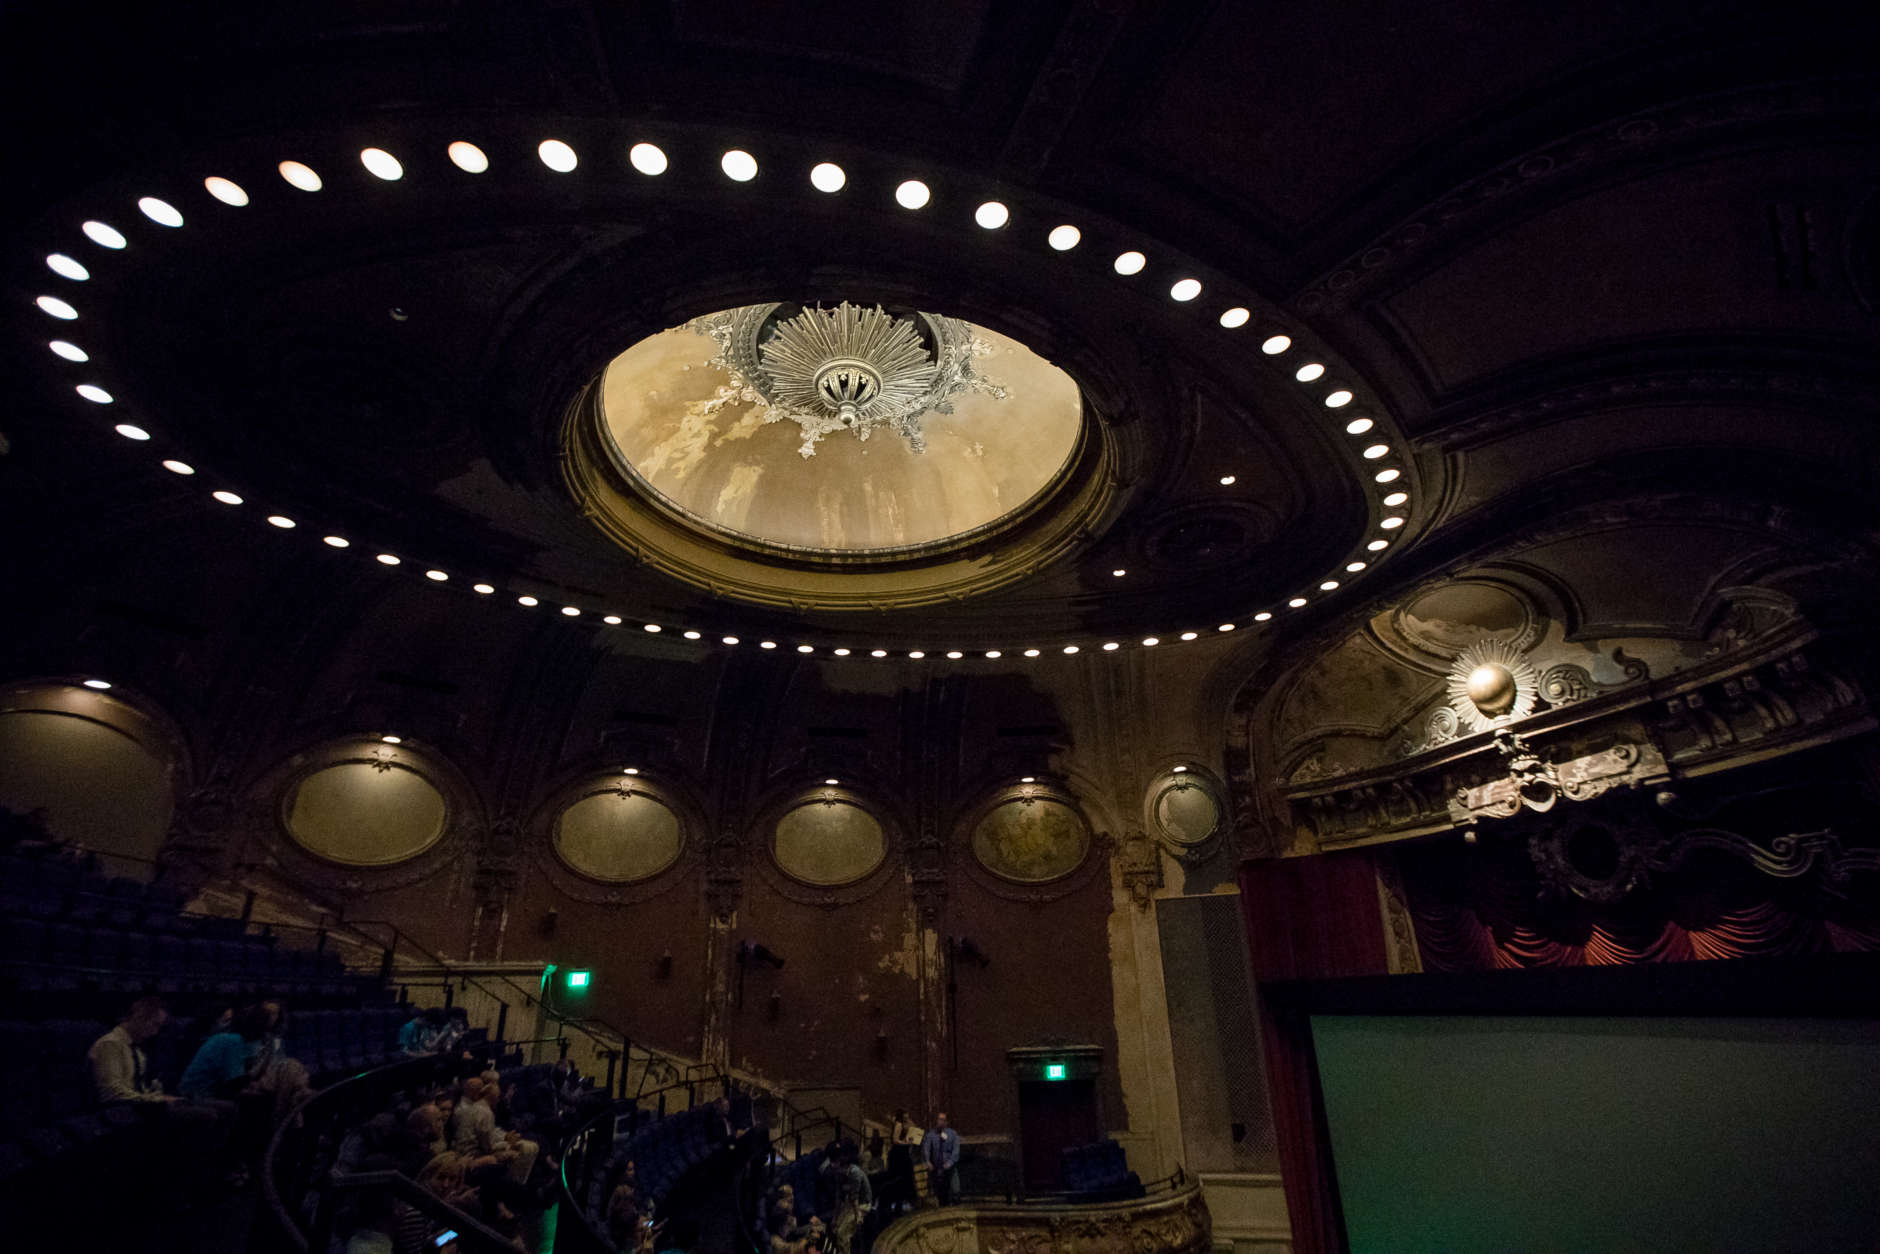 After decades of decay, it was acquired from the city by the Maryland Film Festival in July 2015, and restoration began in the November of that year. (Courtesy Chelsea Clough/Abel Communications)